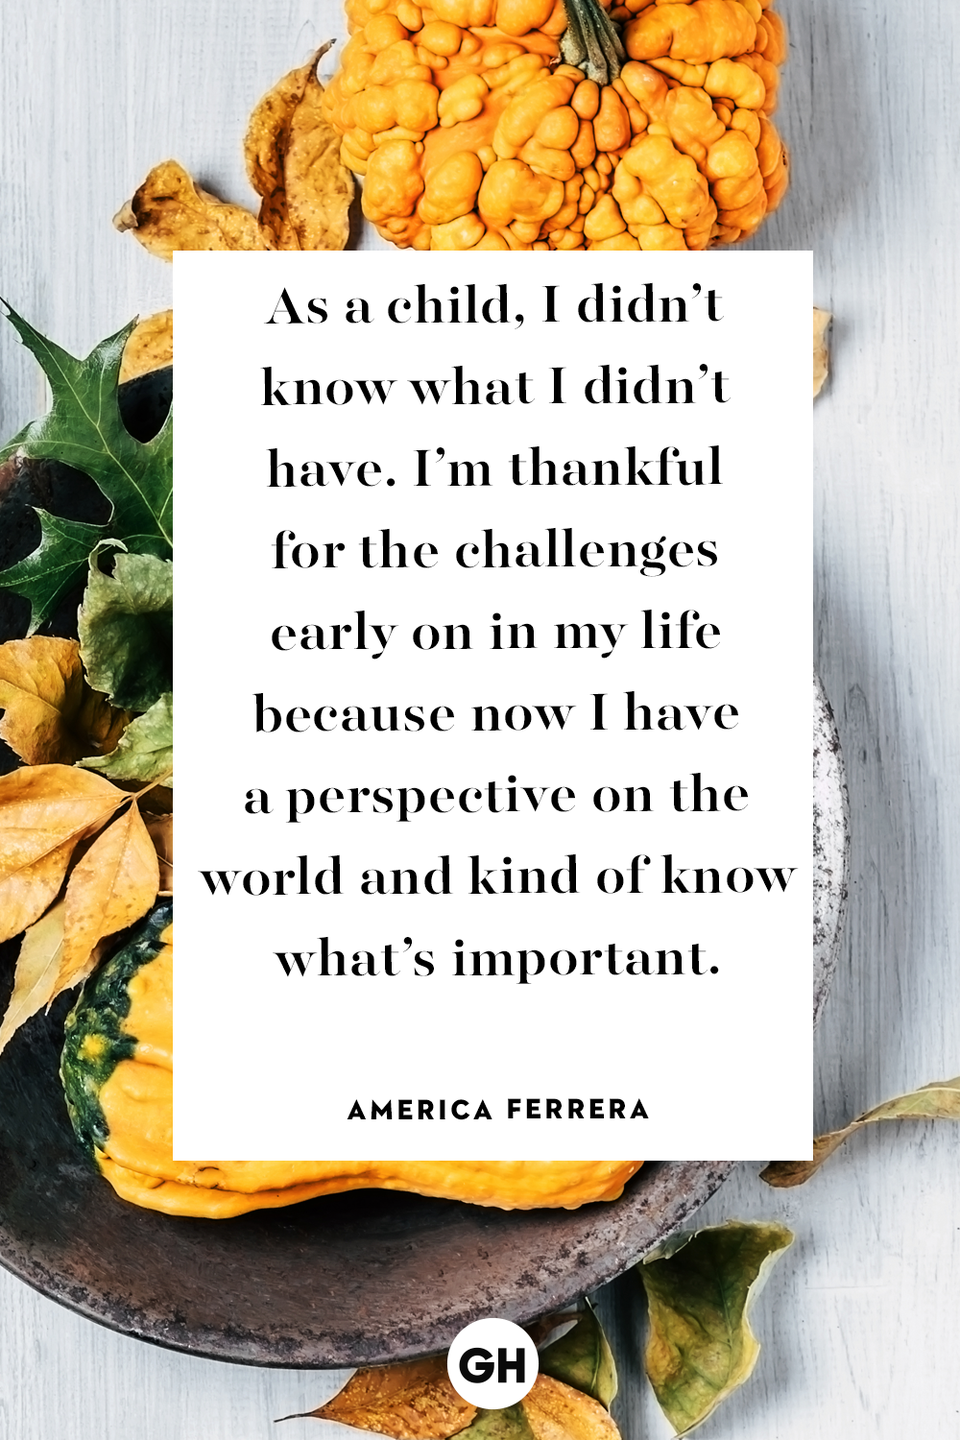 <p>As a child, I didn’t know what I didn’t have. I’m thankful for the challenges early on in my life because now I have a perspective on the world and kind of know what’s important.</p>